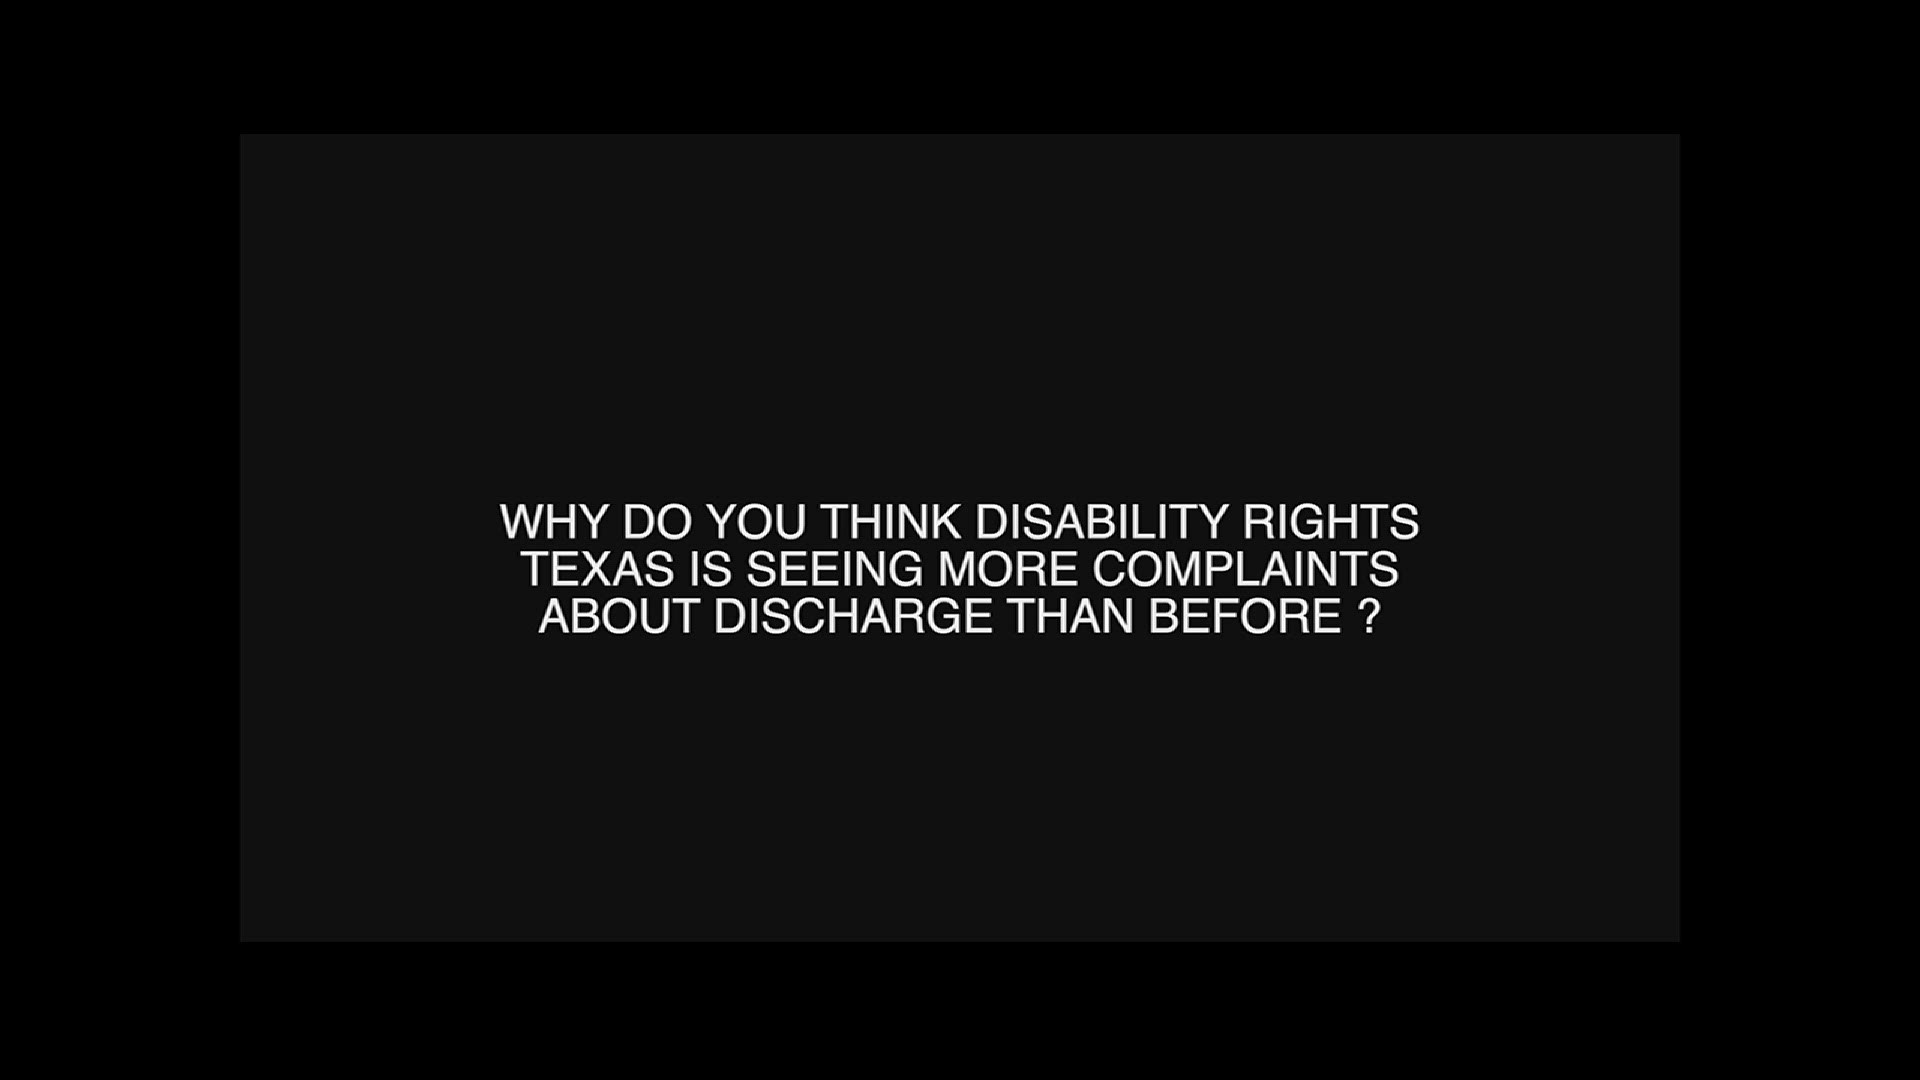 Cindy Gibson of Disability Rights